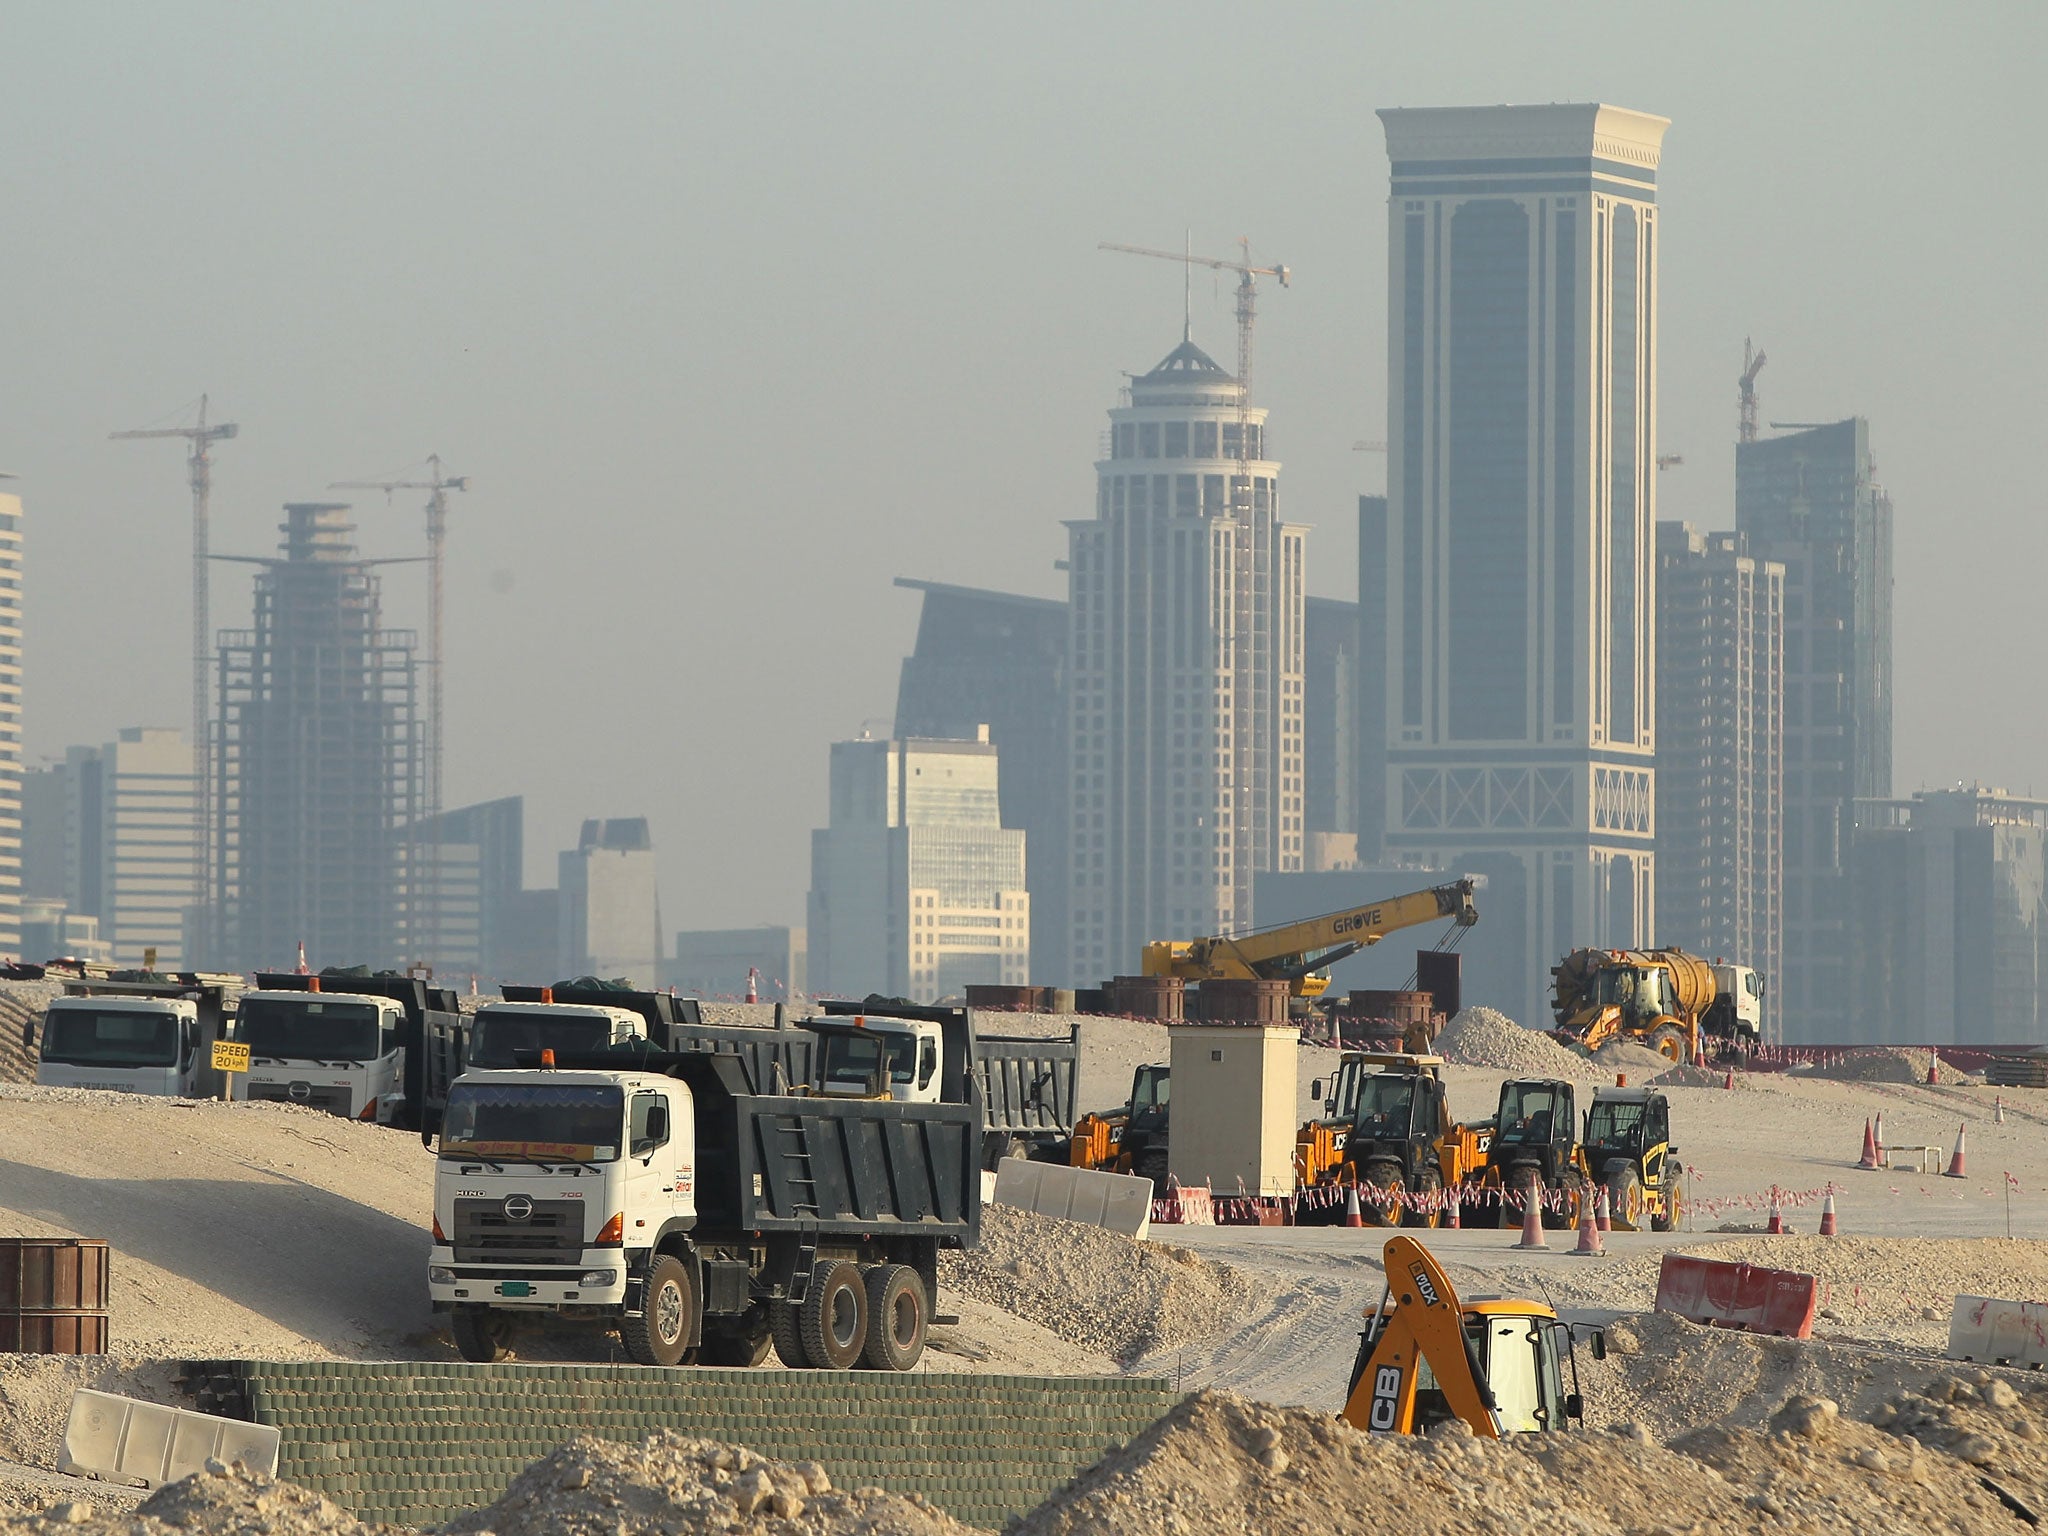 FIFA are to investigate the conditions of construction workers in projects at Lusail City